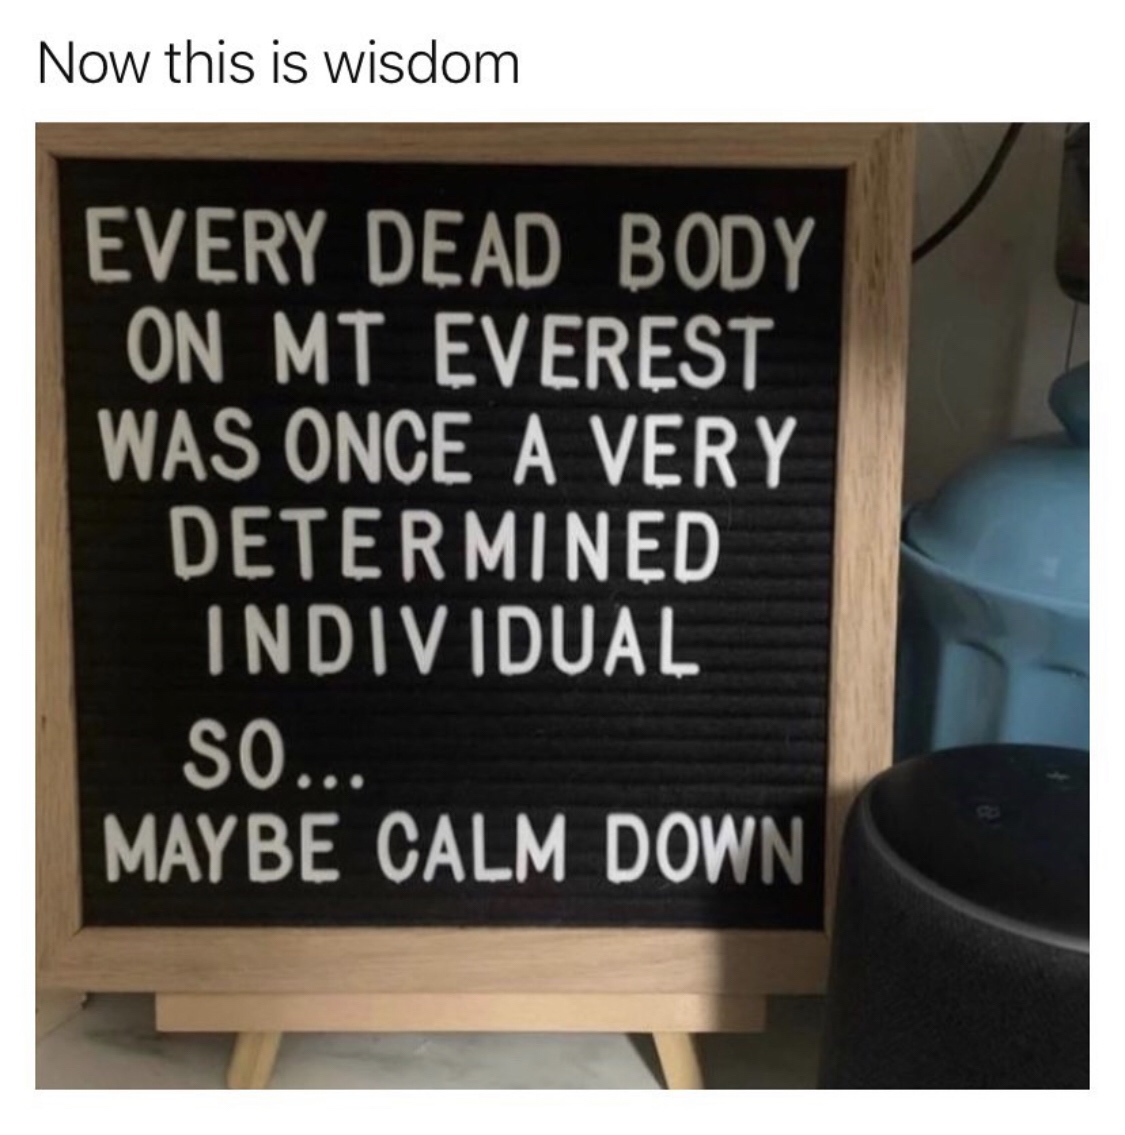 every dead body on mount everest was once a determined person - Now this is wisdom Every Dead Body On Mt Everest Was Once A Very Determined Individual So.. Maybe Calm Down